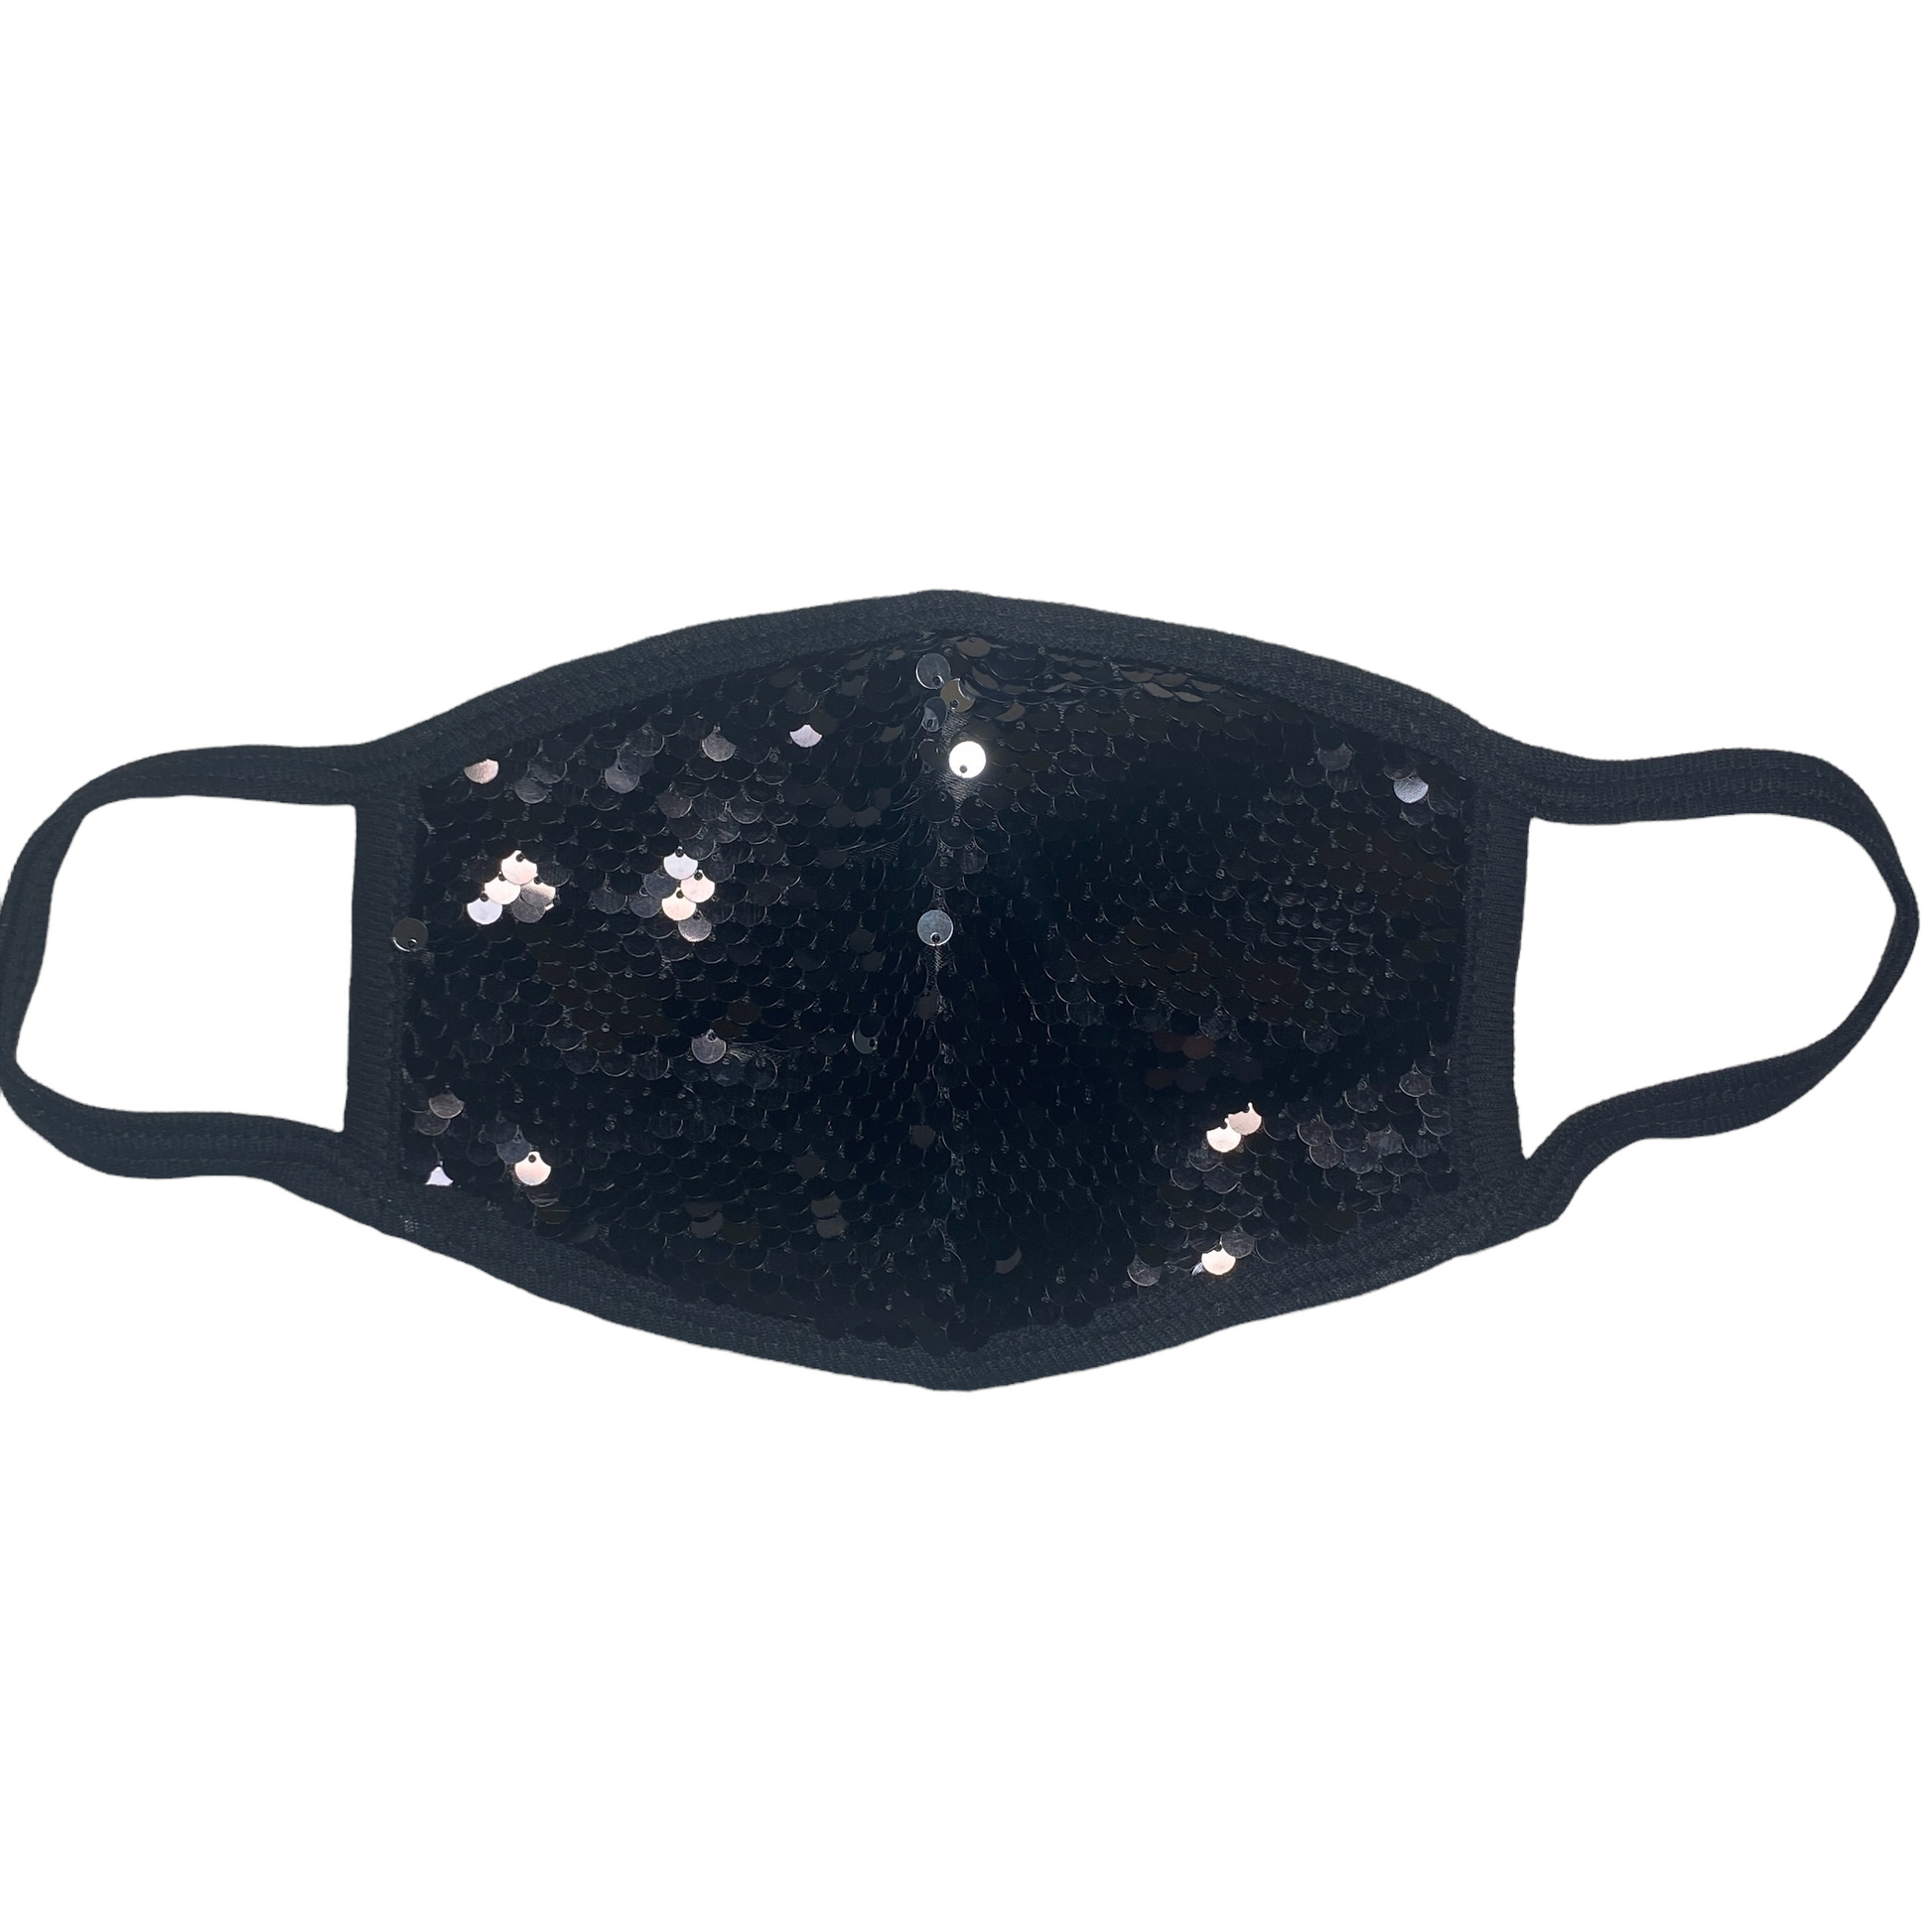 Adult Reusable Fabric Sequin Mask Mask SPIRIT SPARKPLUGS Small Black Sequins  